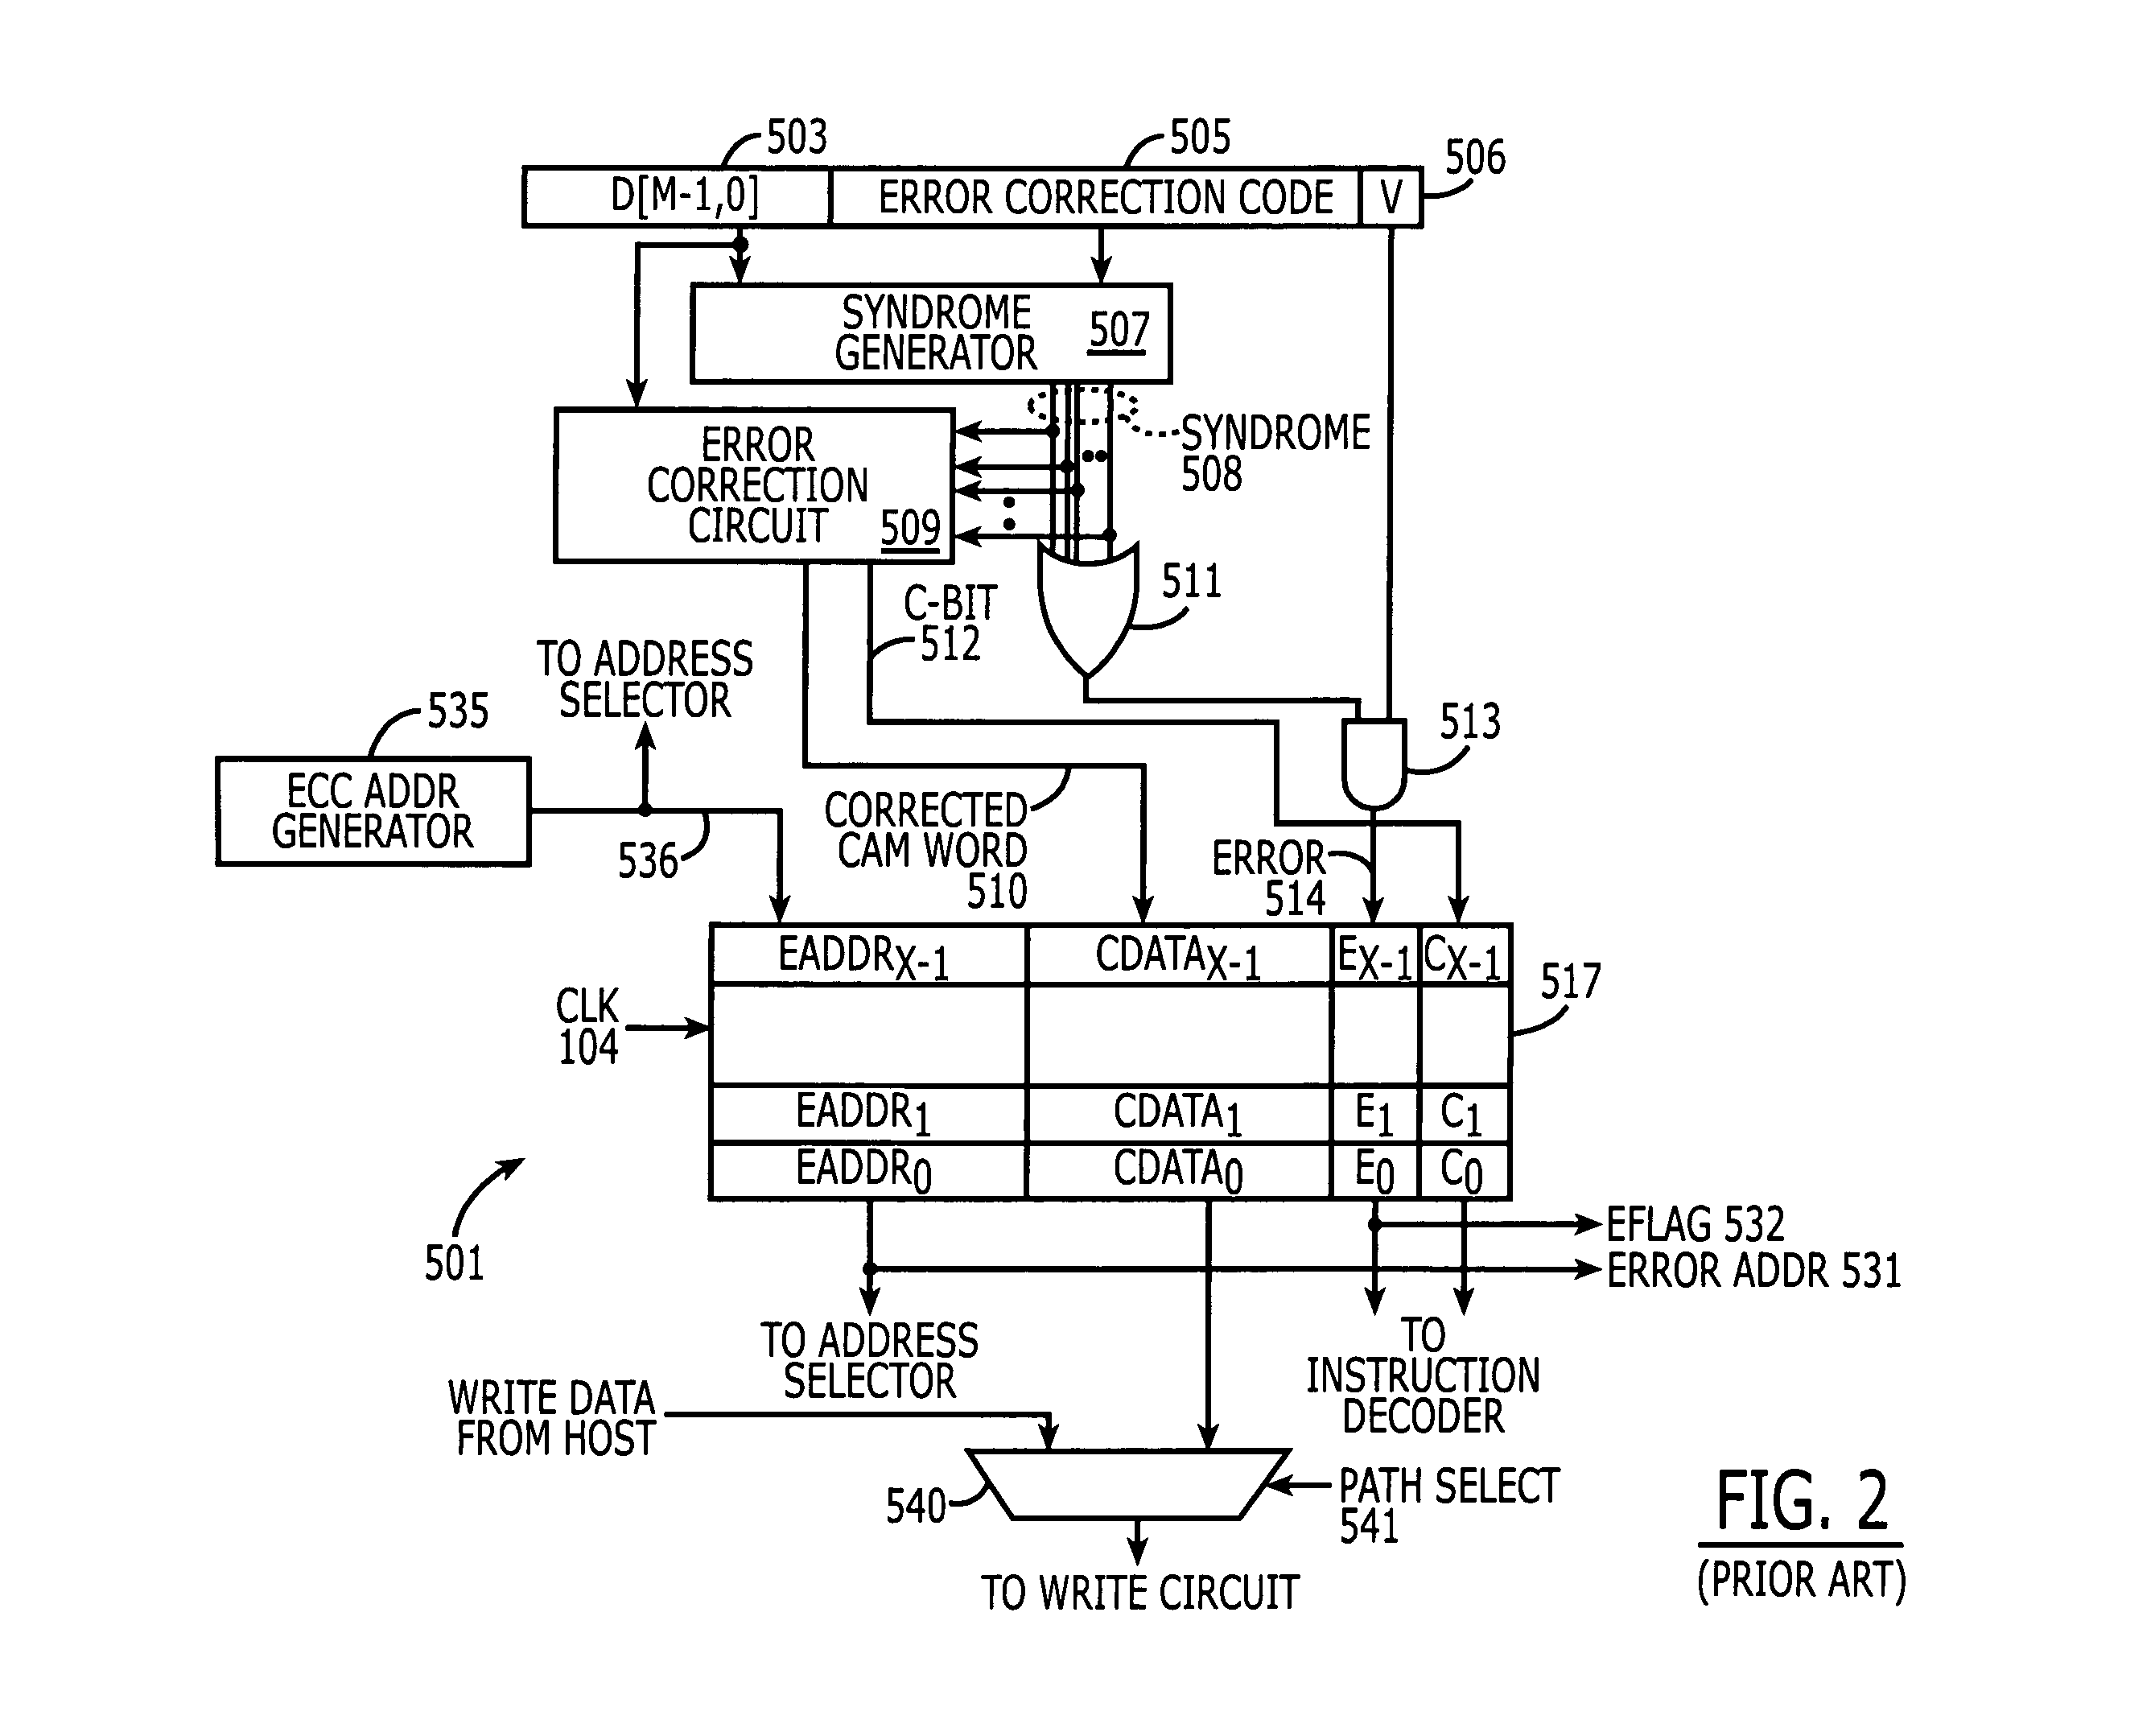 Content addressable memory (CAM) devices having multi-block error detection logic and entry selective error correction logic therein